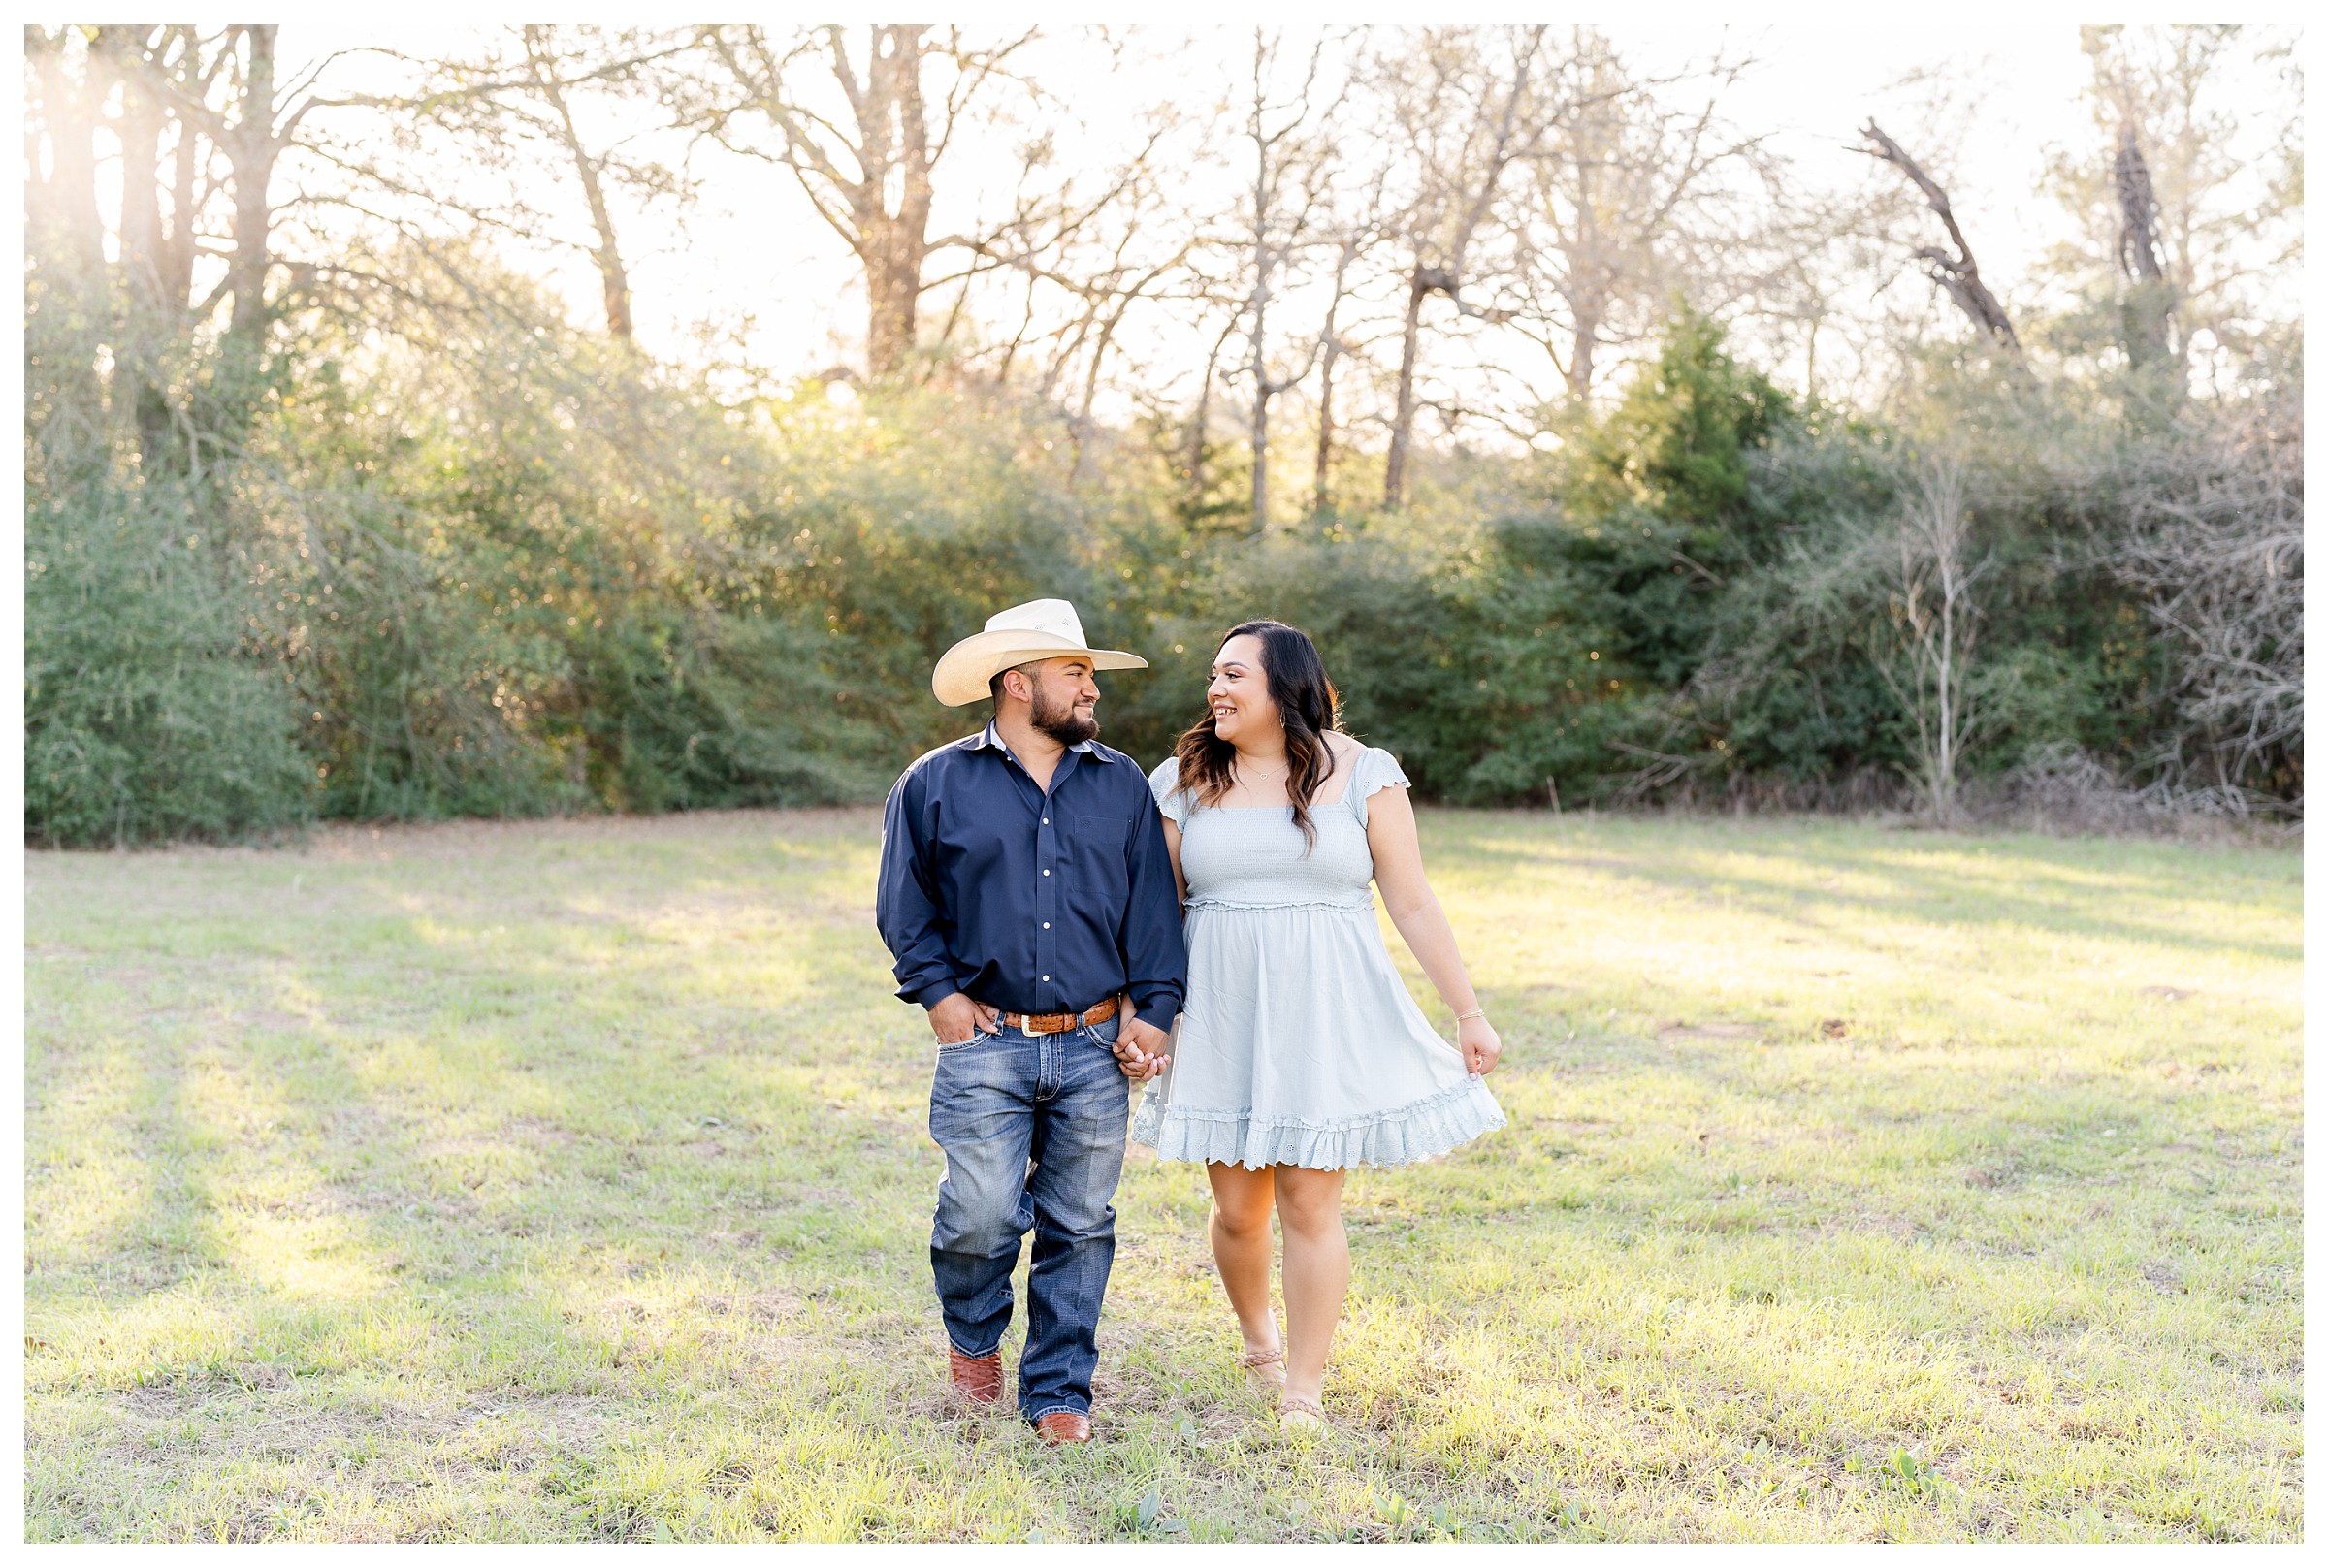 Couple smiling and walking towards camera in an open field at sunset while surrounded by trees and he is wearing a dark blue button down with jeans and cowboy hat while she is wearing a light blue dress